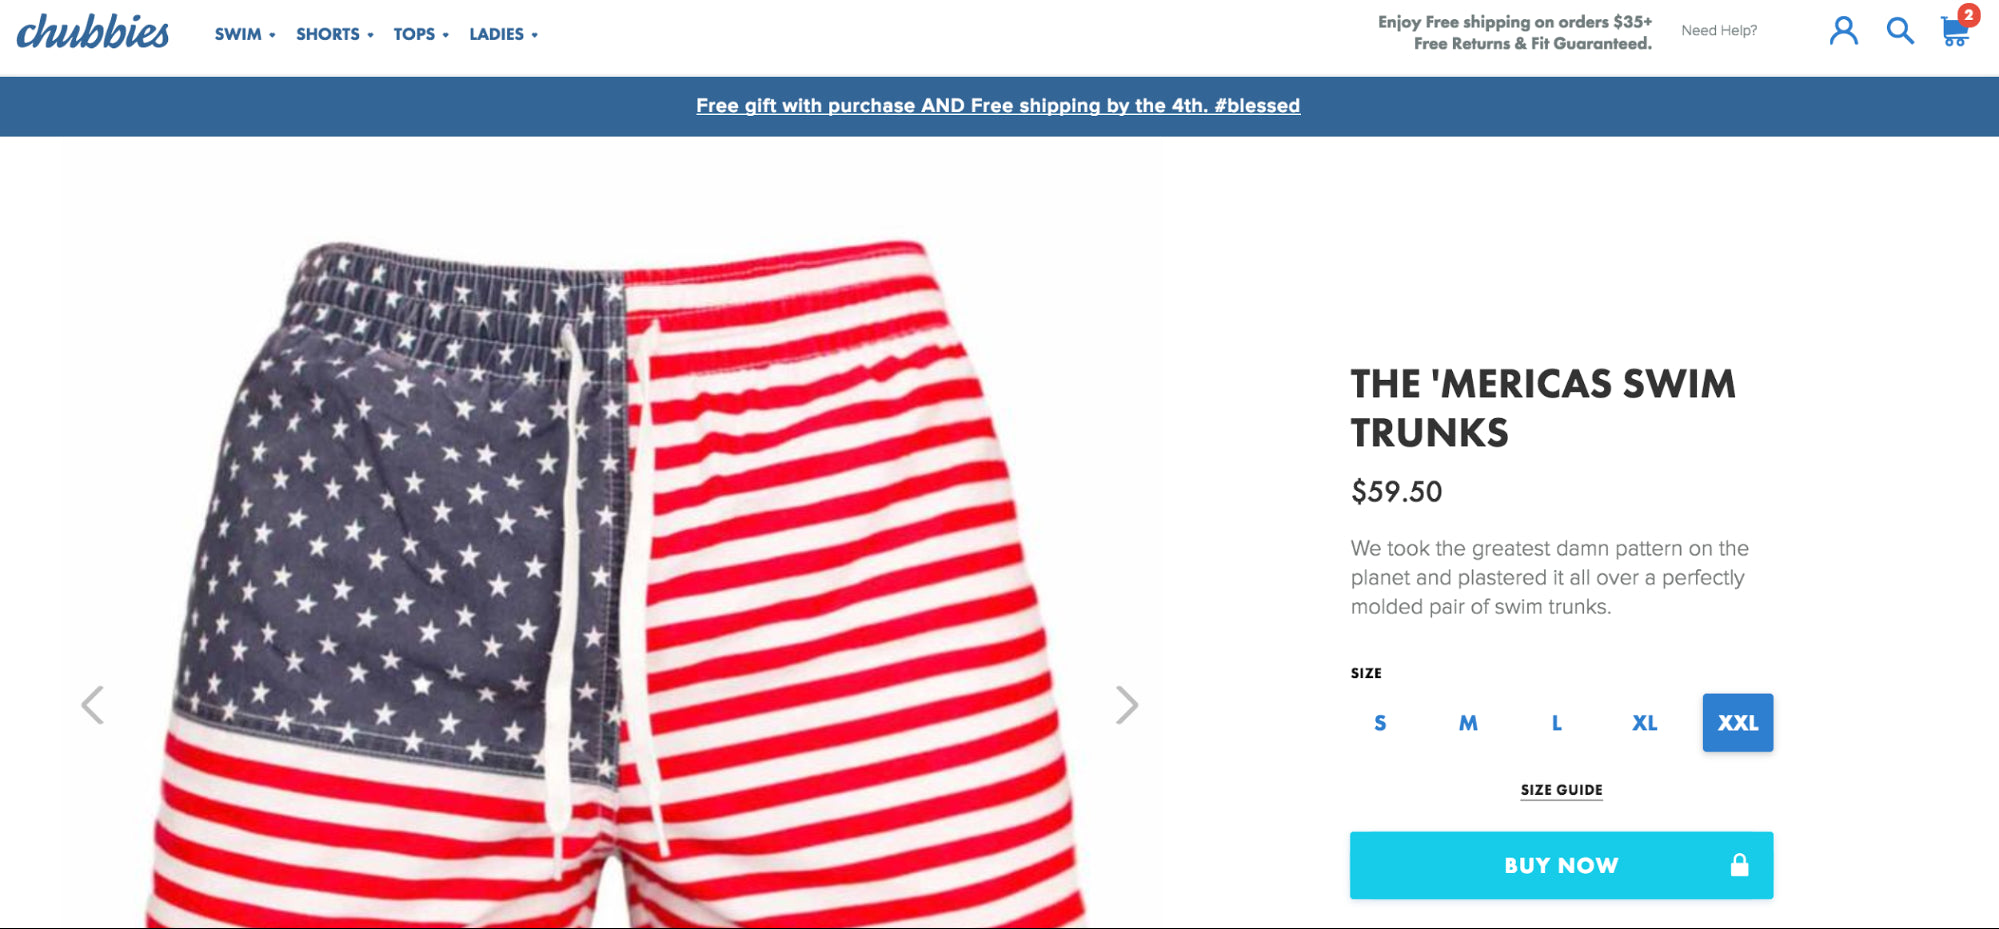 Chubbies product page